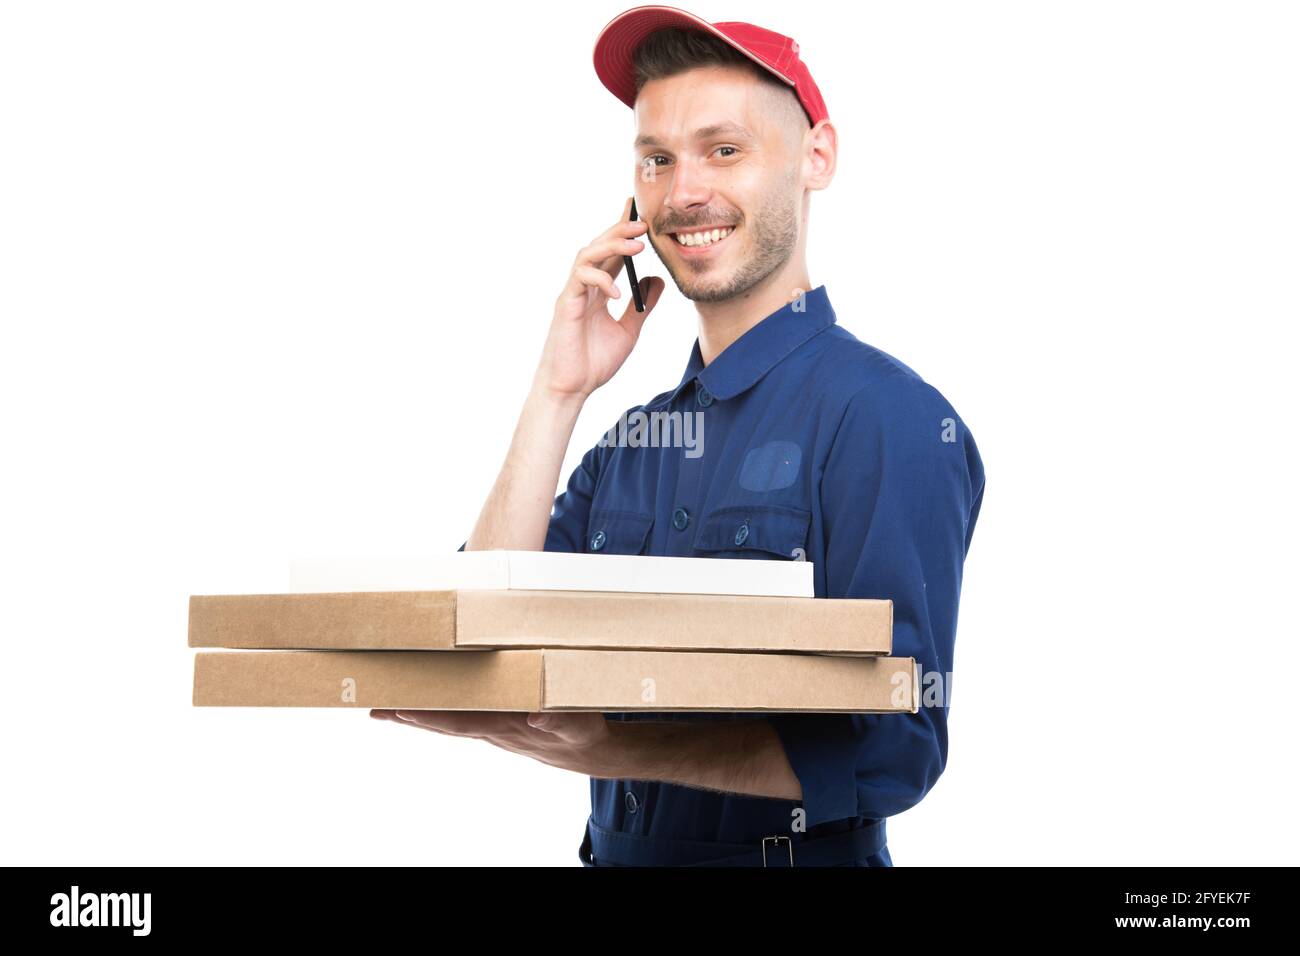 https://c8.alamy.com/comp/2FYEK7F/horizontal-medium-portrait-of-handsome-young-adult-caucasian-pizza-guy-holding-boxes-talking-on-phone-looking-at-camera-white-background-2FYEK7F.jpg